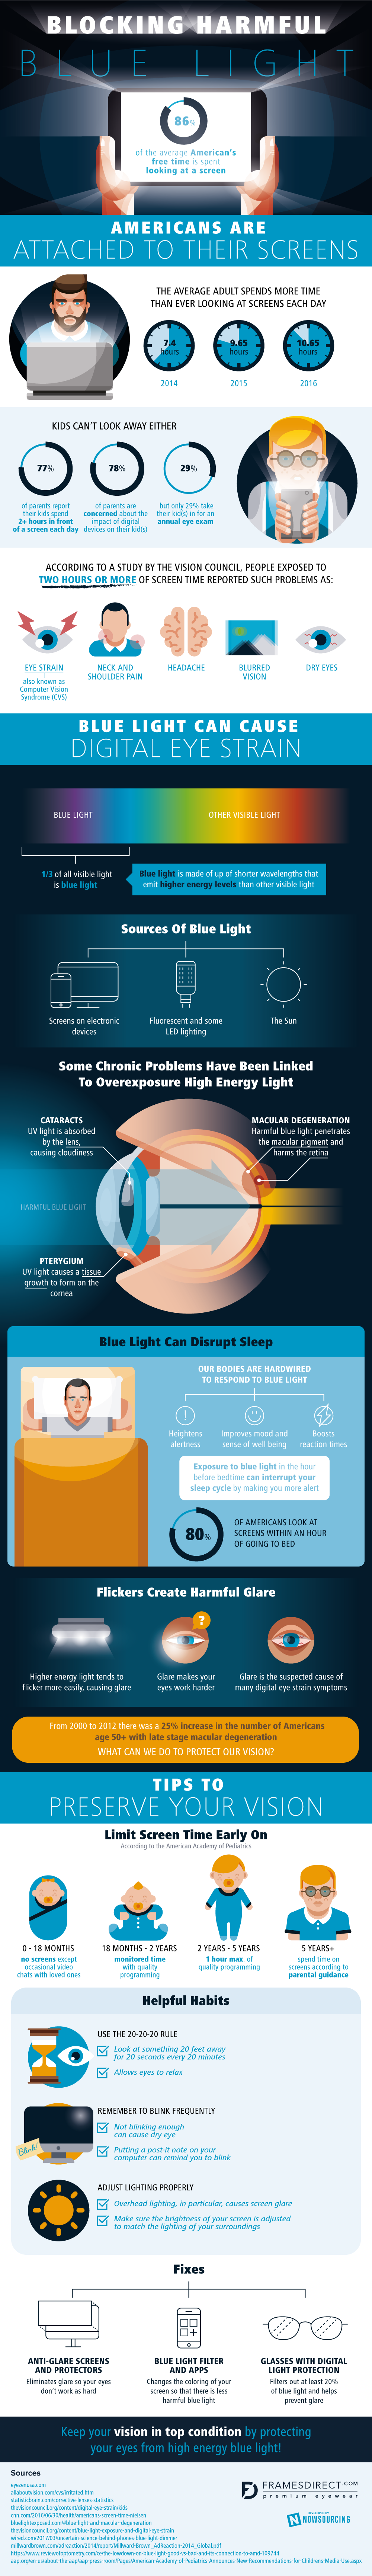 The Affects Of Blue Light On Your Vision - Infographic